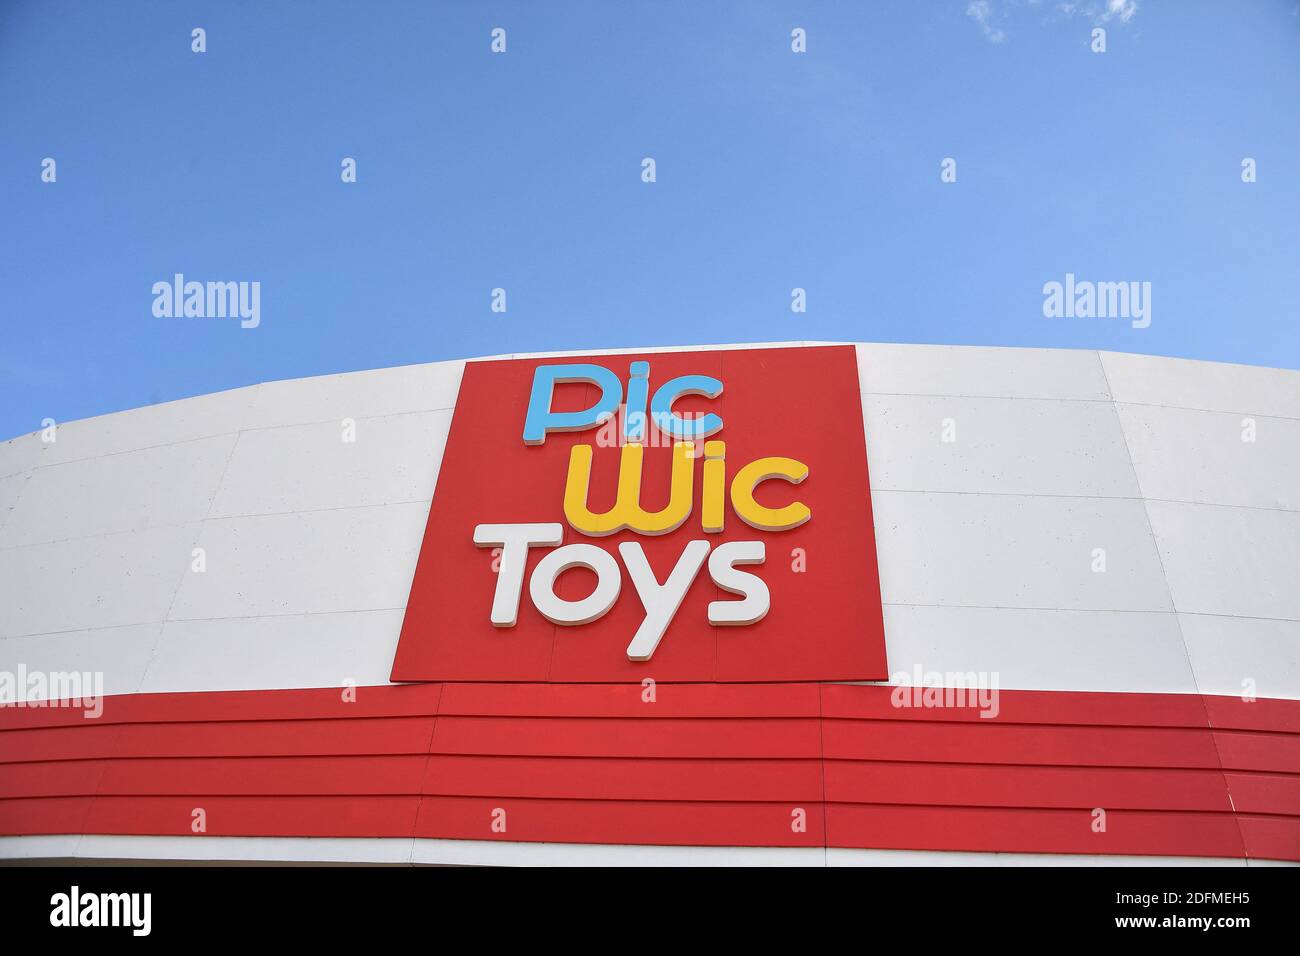 A shop sign of Pic Wic Toys, on November 14, 2020 in Ormesson-sur-Marne,  FRANCE. Photo by David Niviere/ABACAPRESS.COM Stock Photo - Alamy